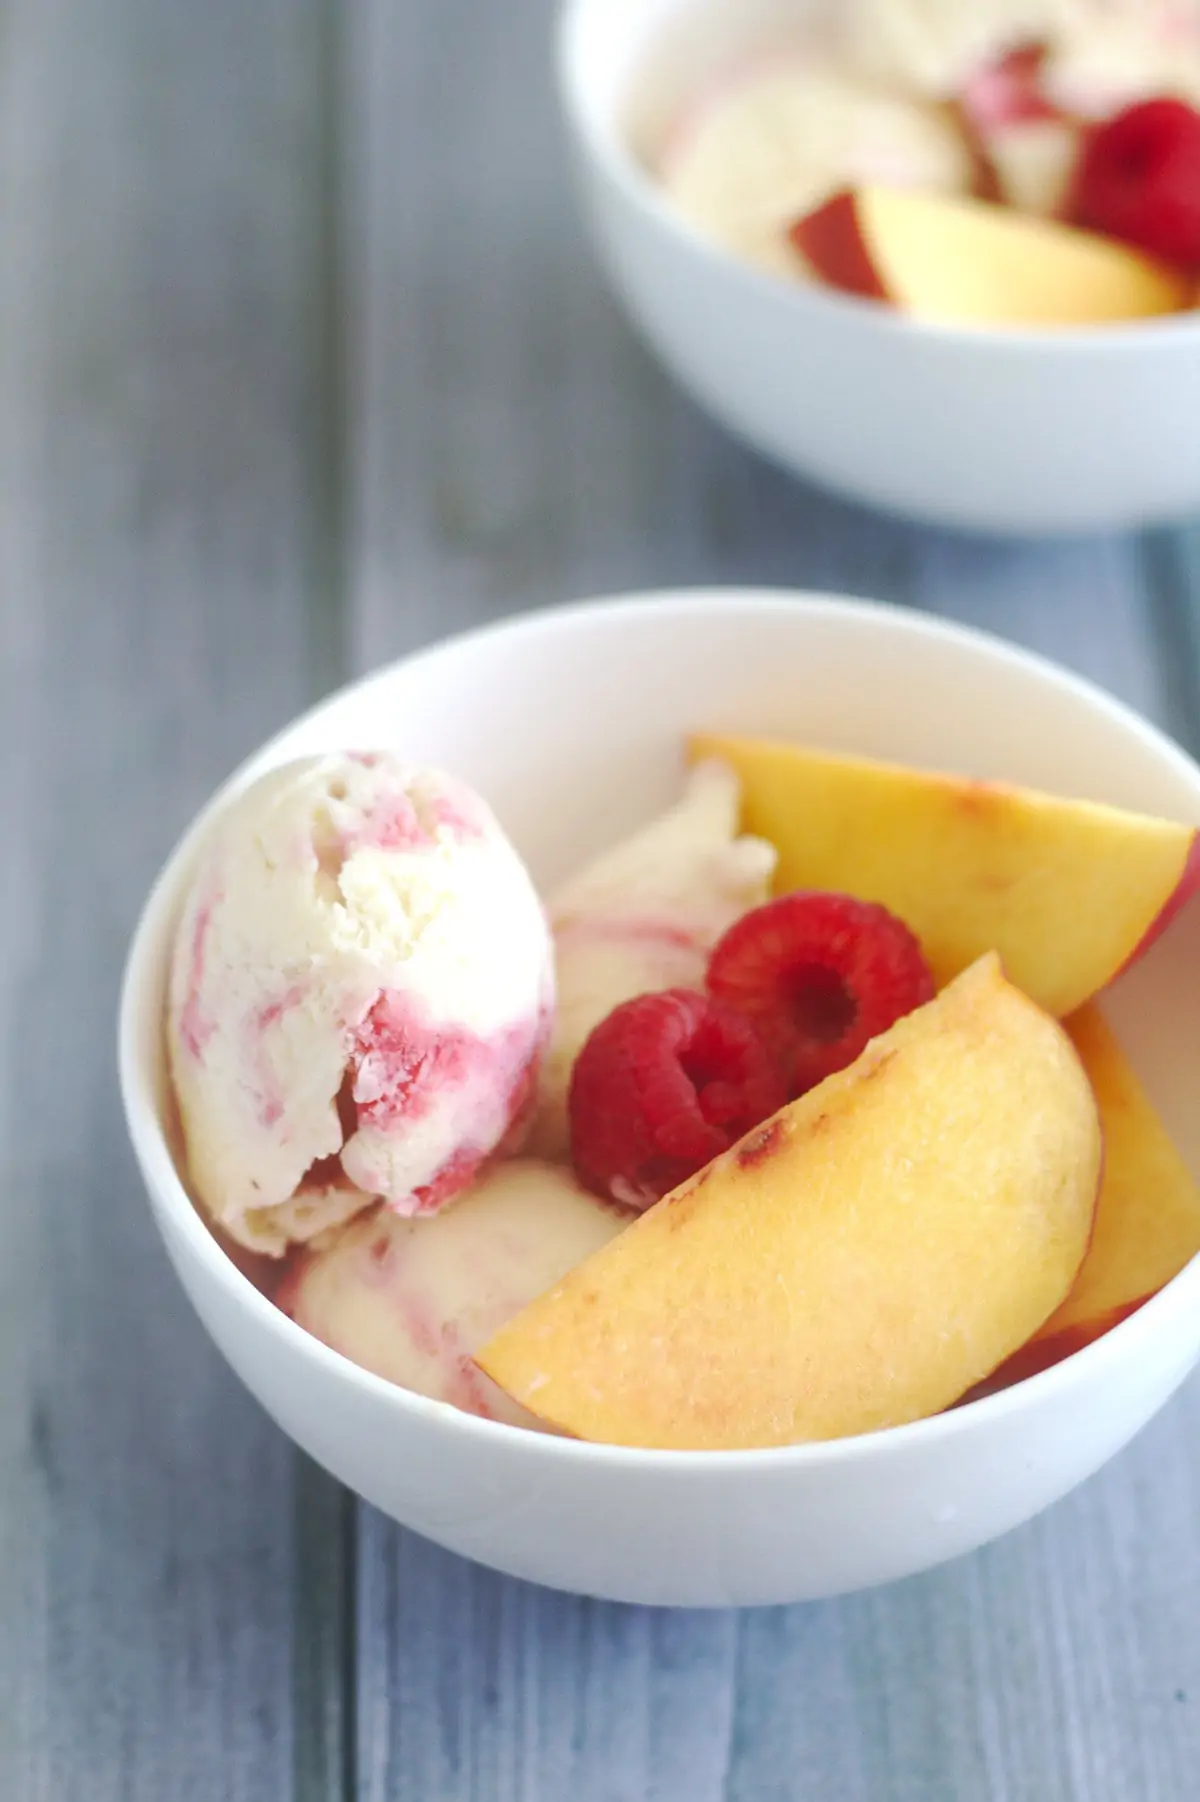 Ice cream in a white bowl with raspberries and peaches.